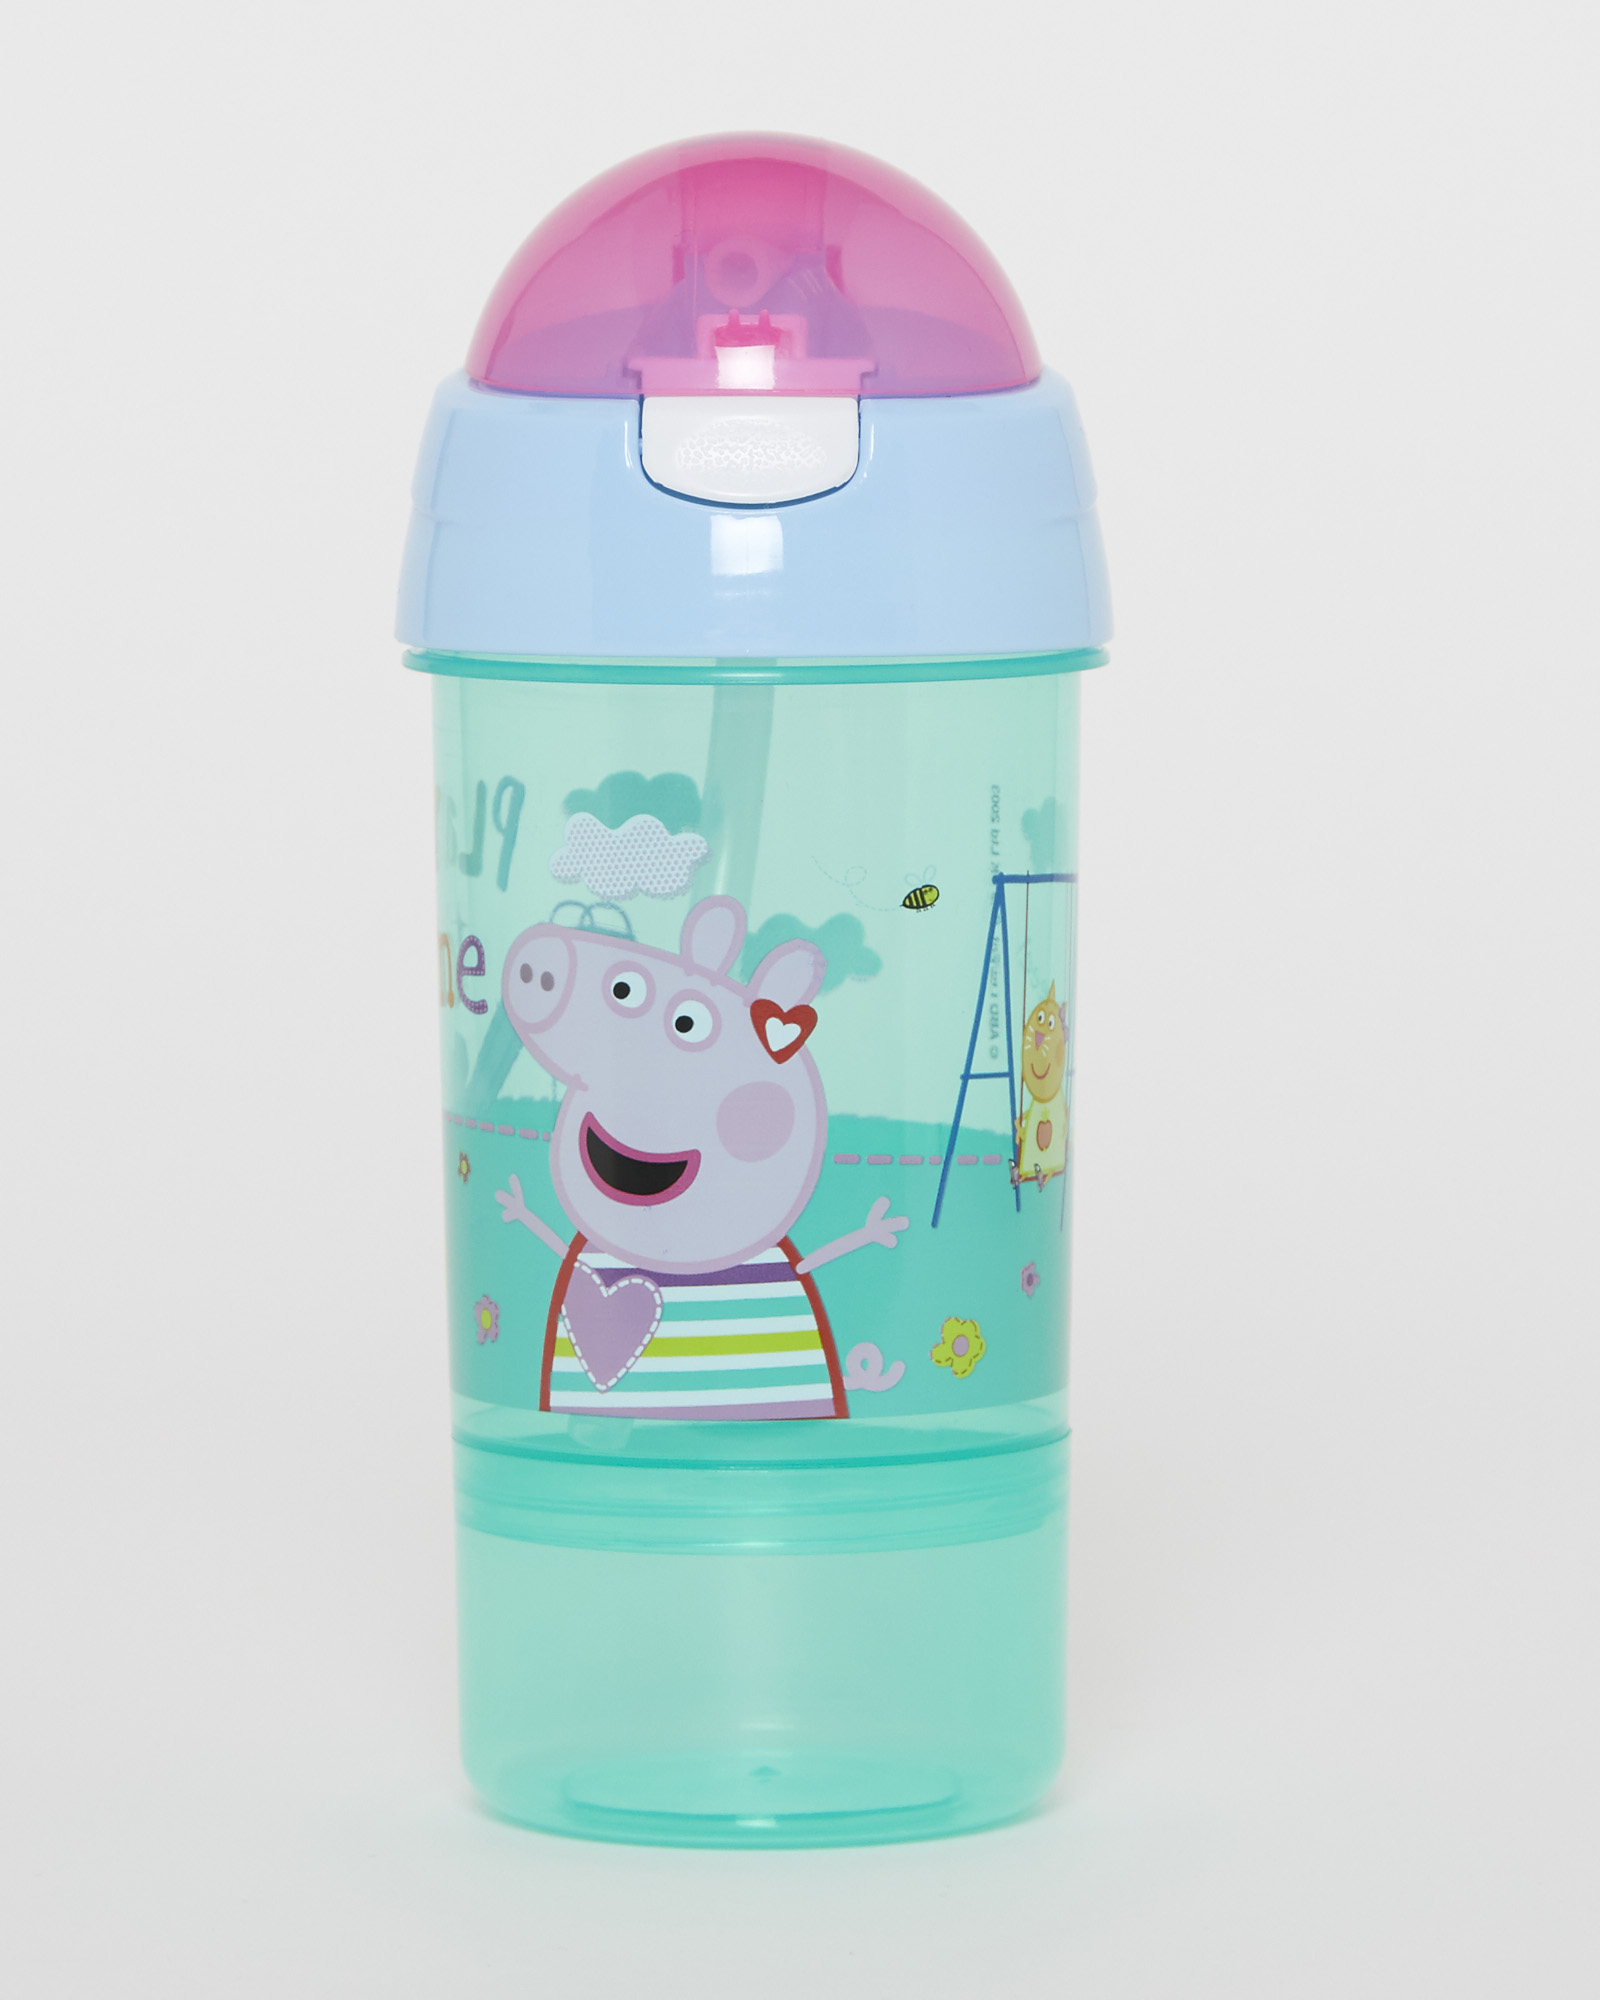 Peppa Pig Children's Sip and Snack Water Bottle, 380ml, Pink/Green